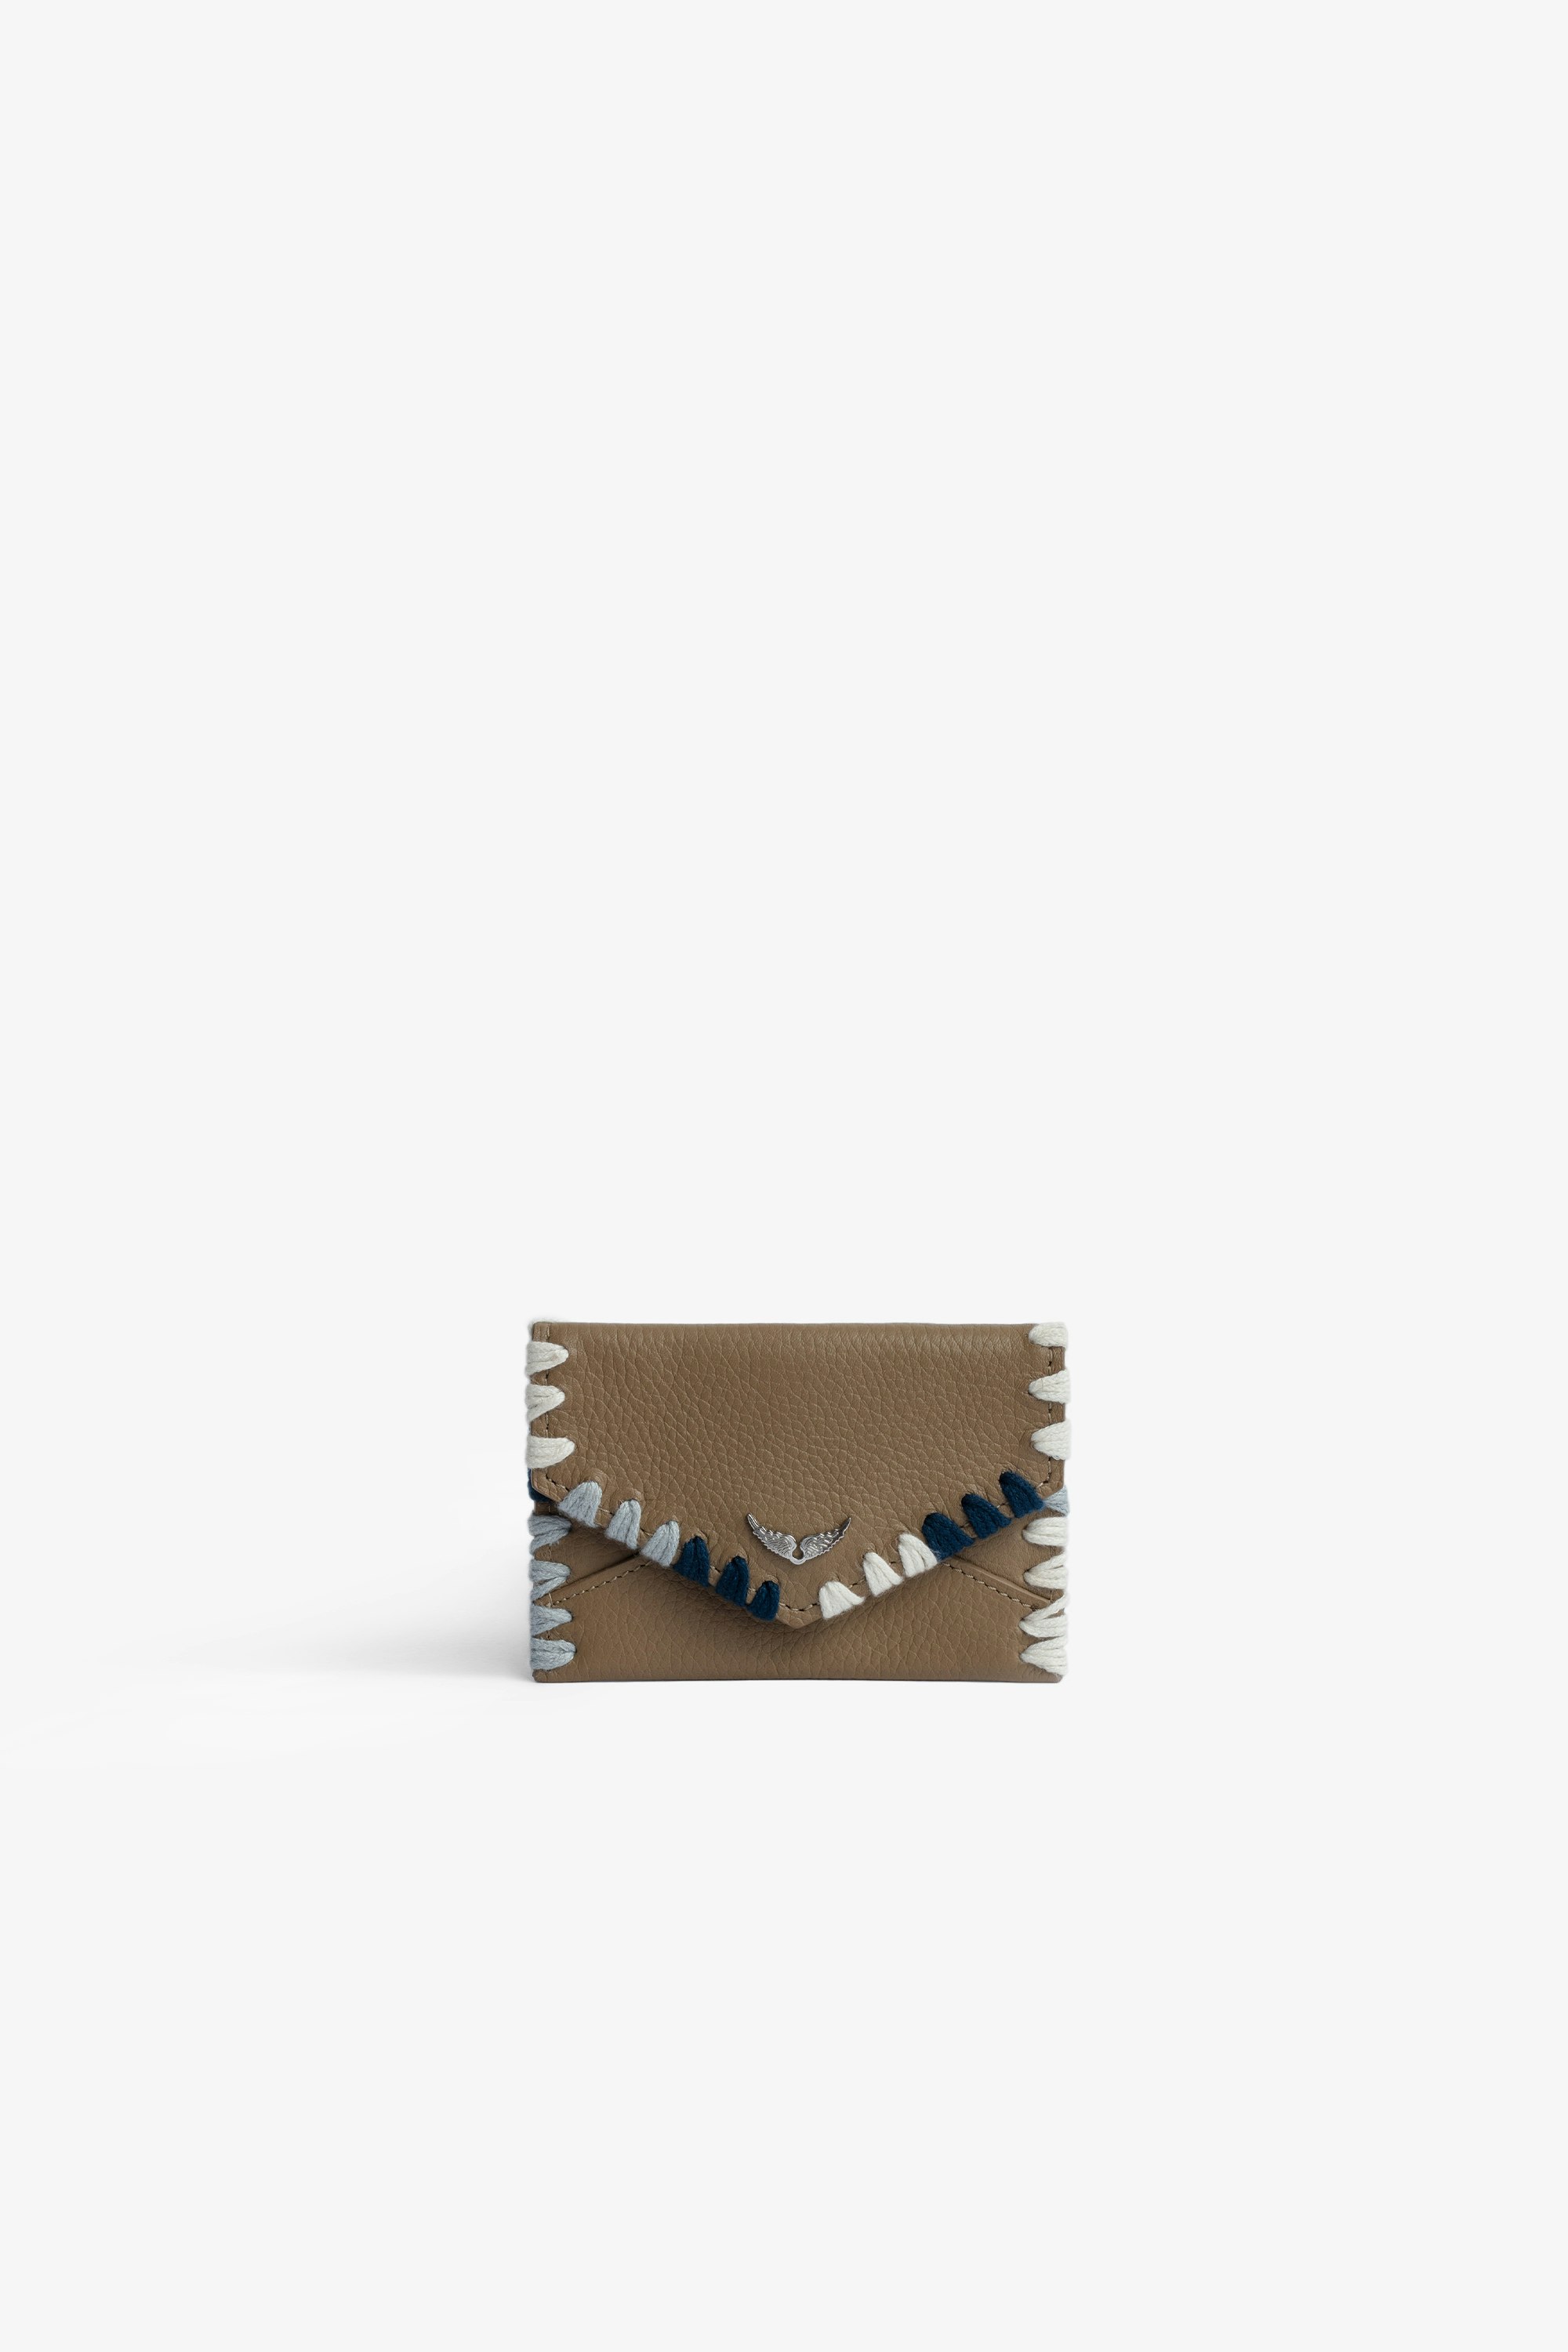 Secret クラッチバッグ Taupe grained leather clutch 